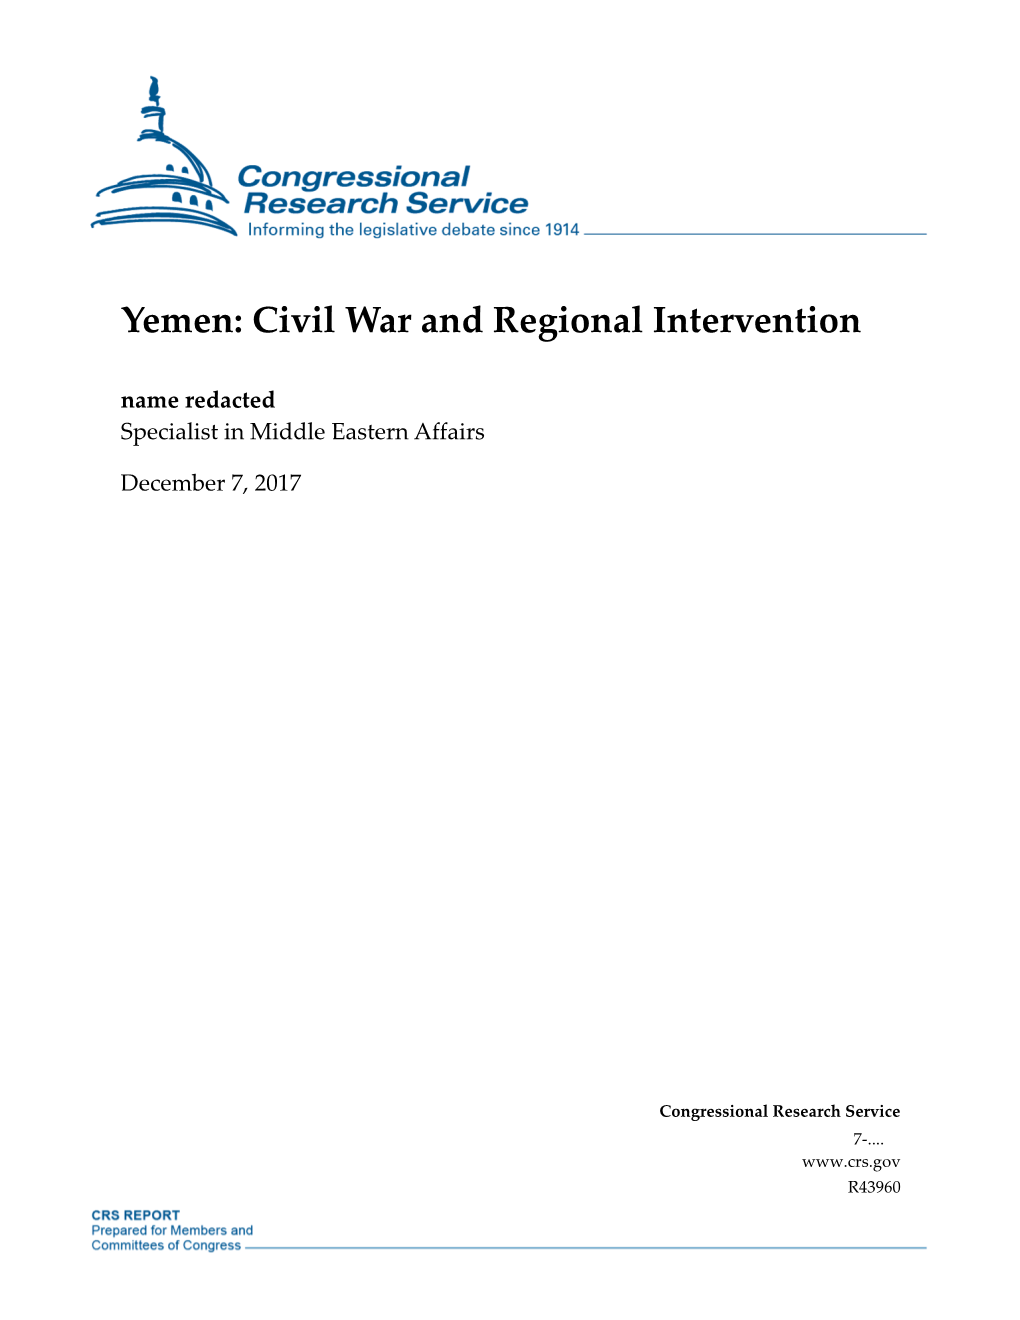 Yemen: Civil War and Regional Intervention Name Redacted Specialist in Middle Eastern Affairs